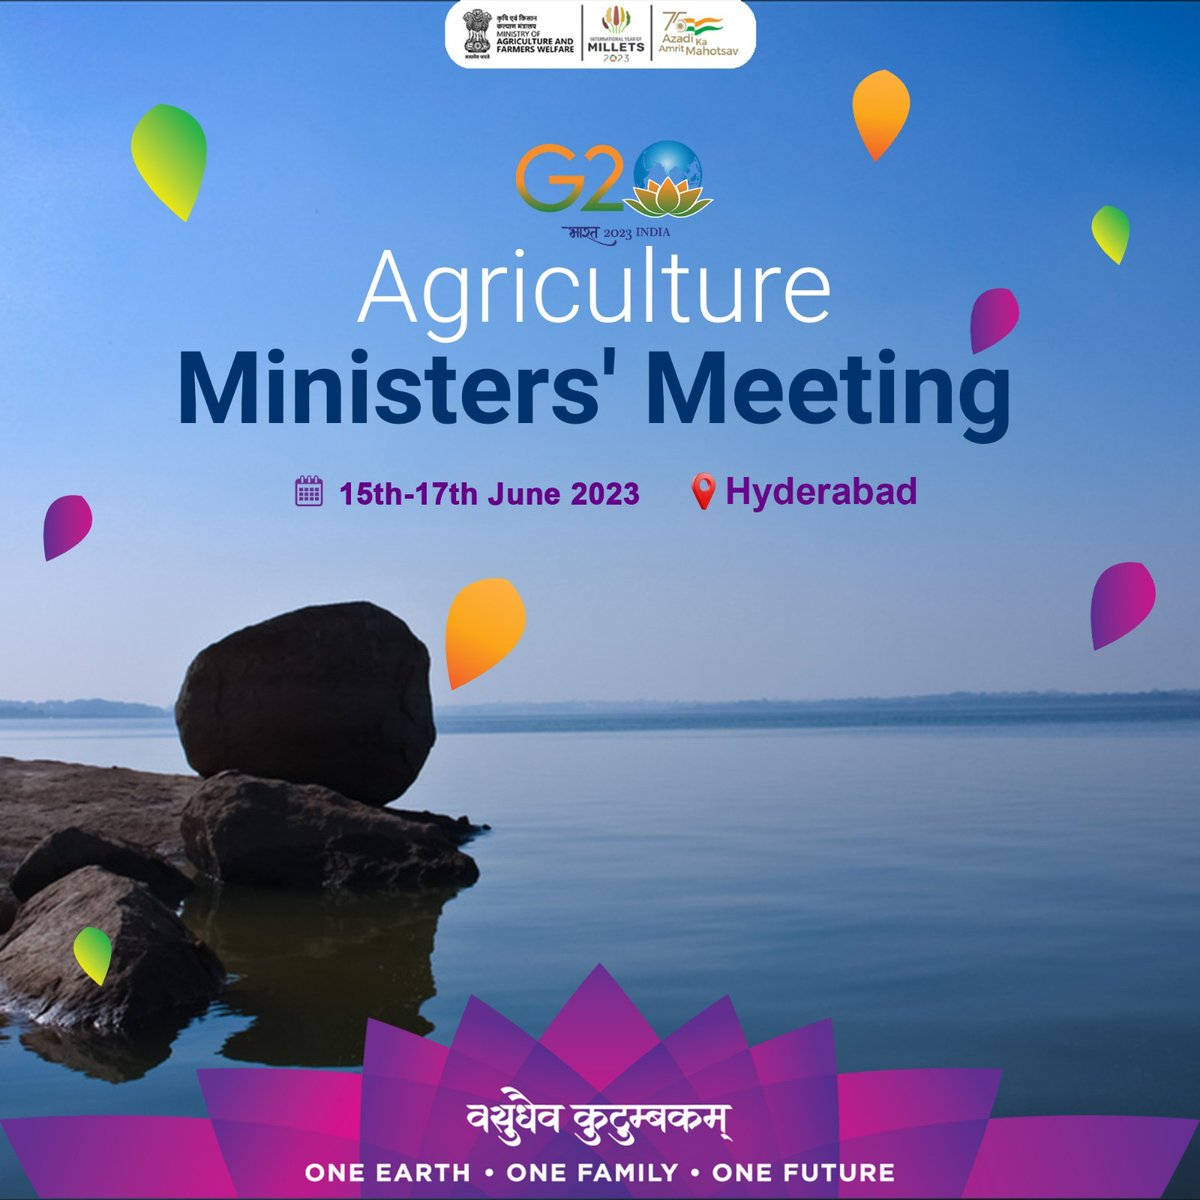 Hyderabad will host the highly anticipated #G20 Agriculture Ministers' Meeting from June 15th to 17th, 2023, underscoring the global commitment to enhancing the agricultural sector.

#G20India #G20AMM2023 #G20Hyderabad 
@g20org